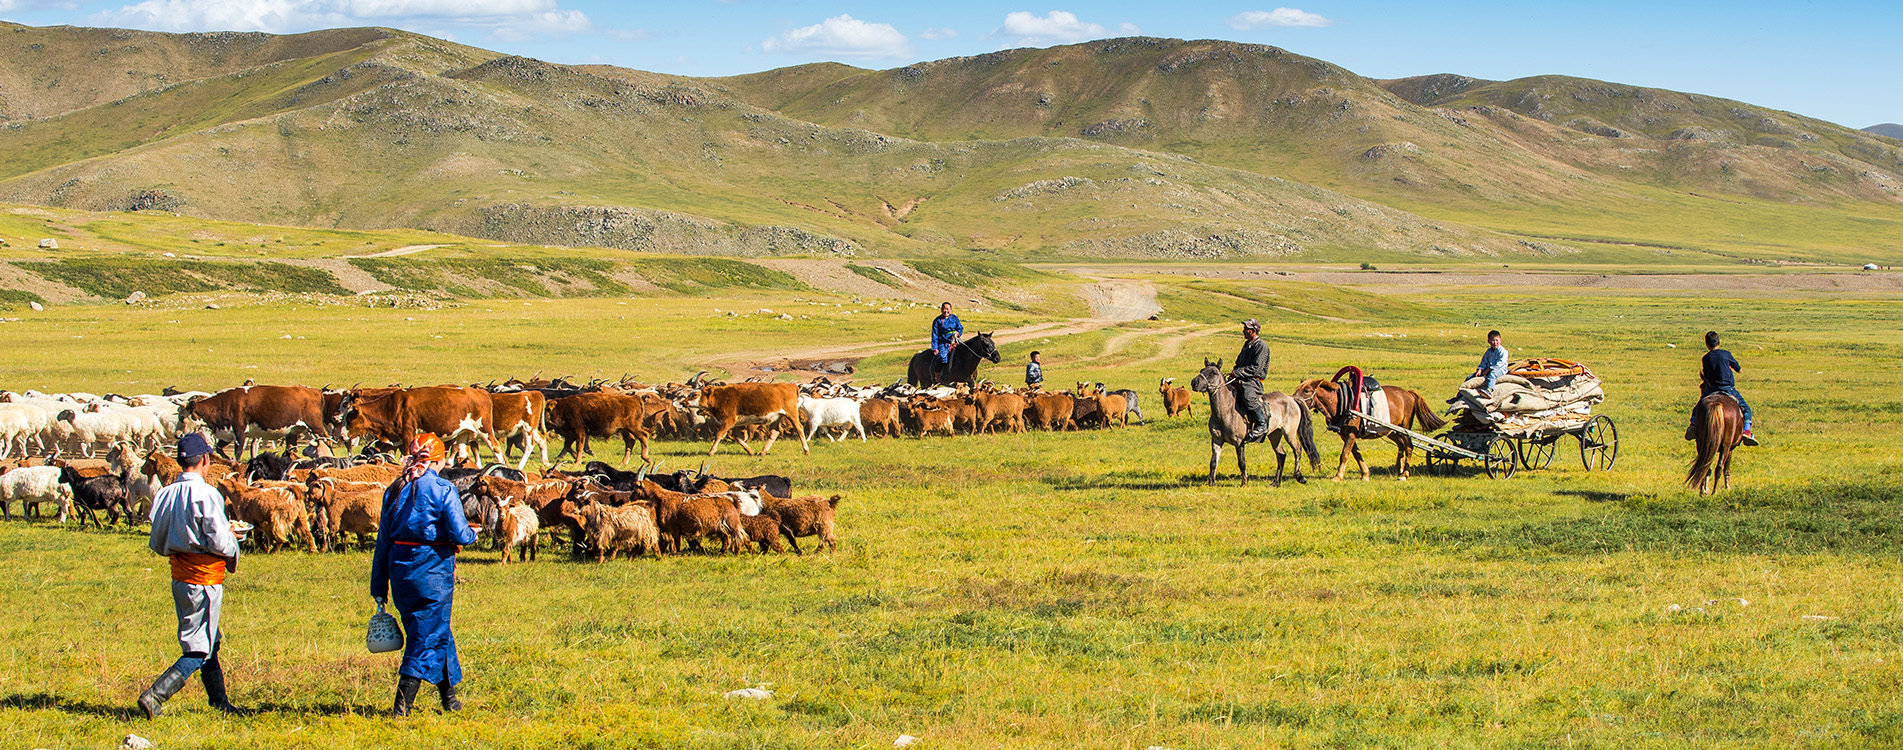 Mongol Nomadic Show Day tour - Discover Mongolia Travel